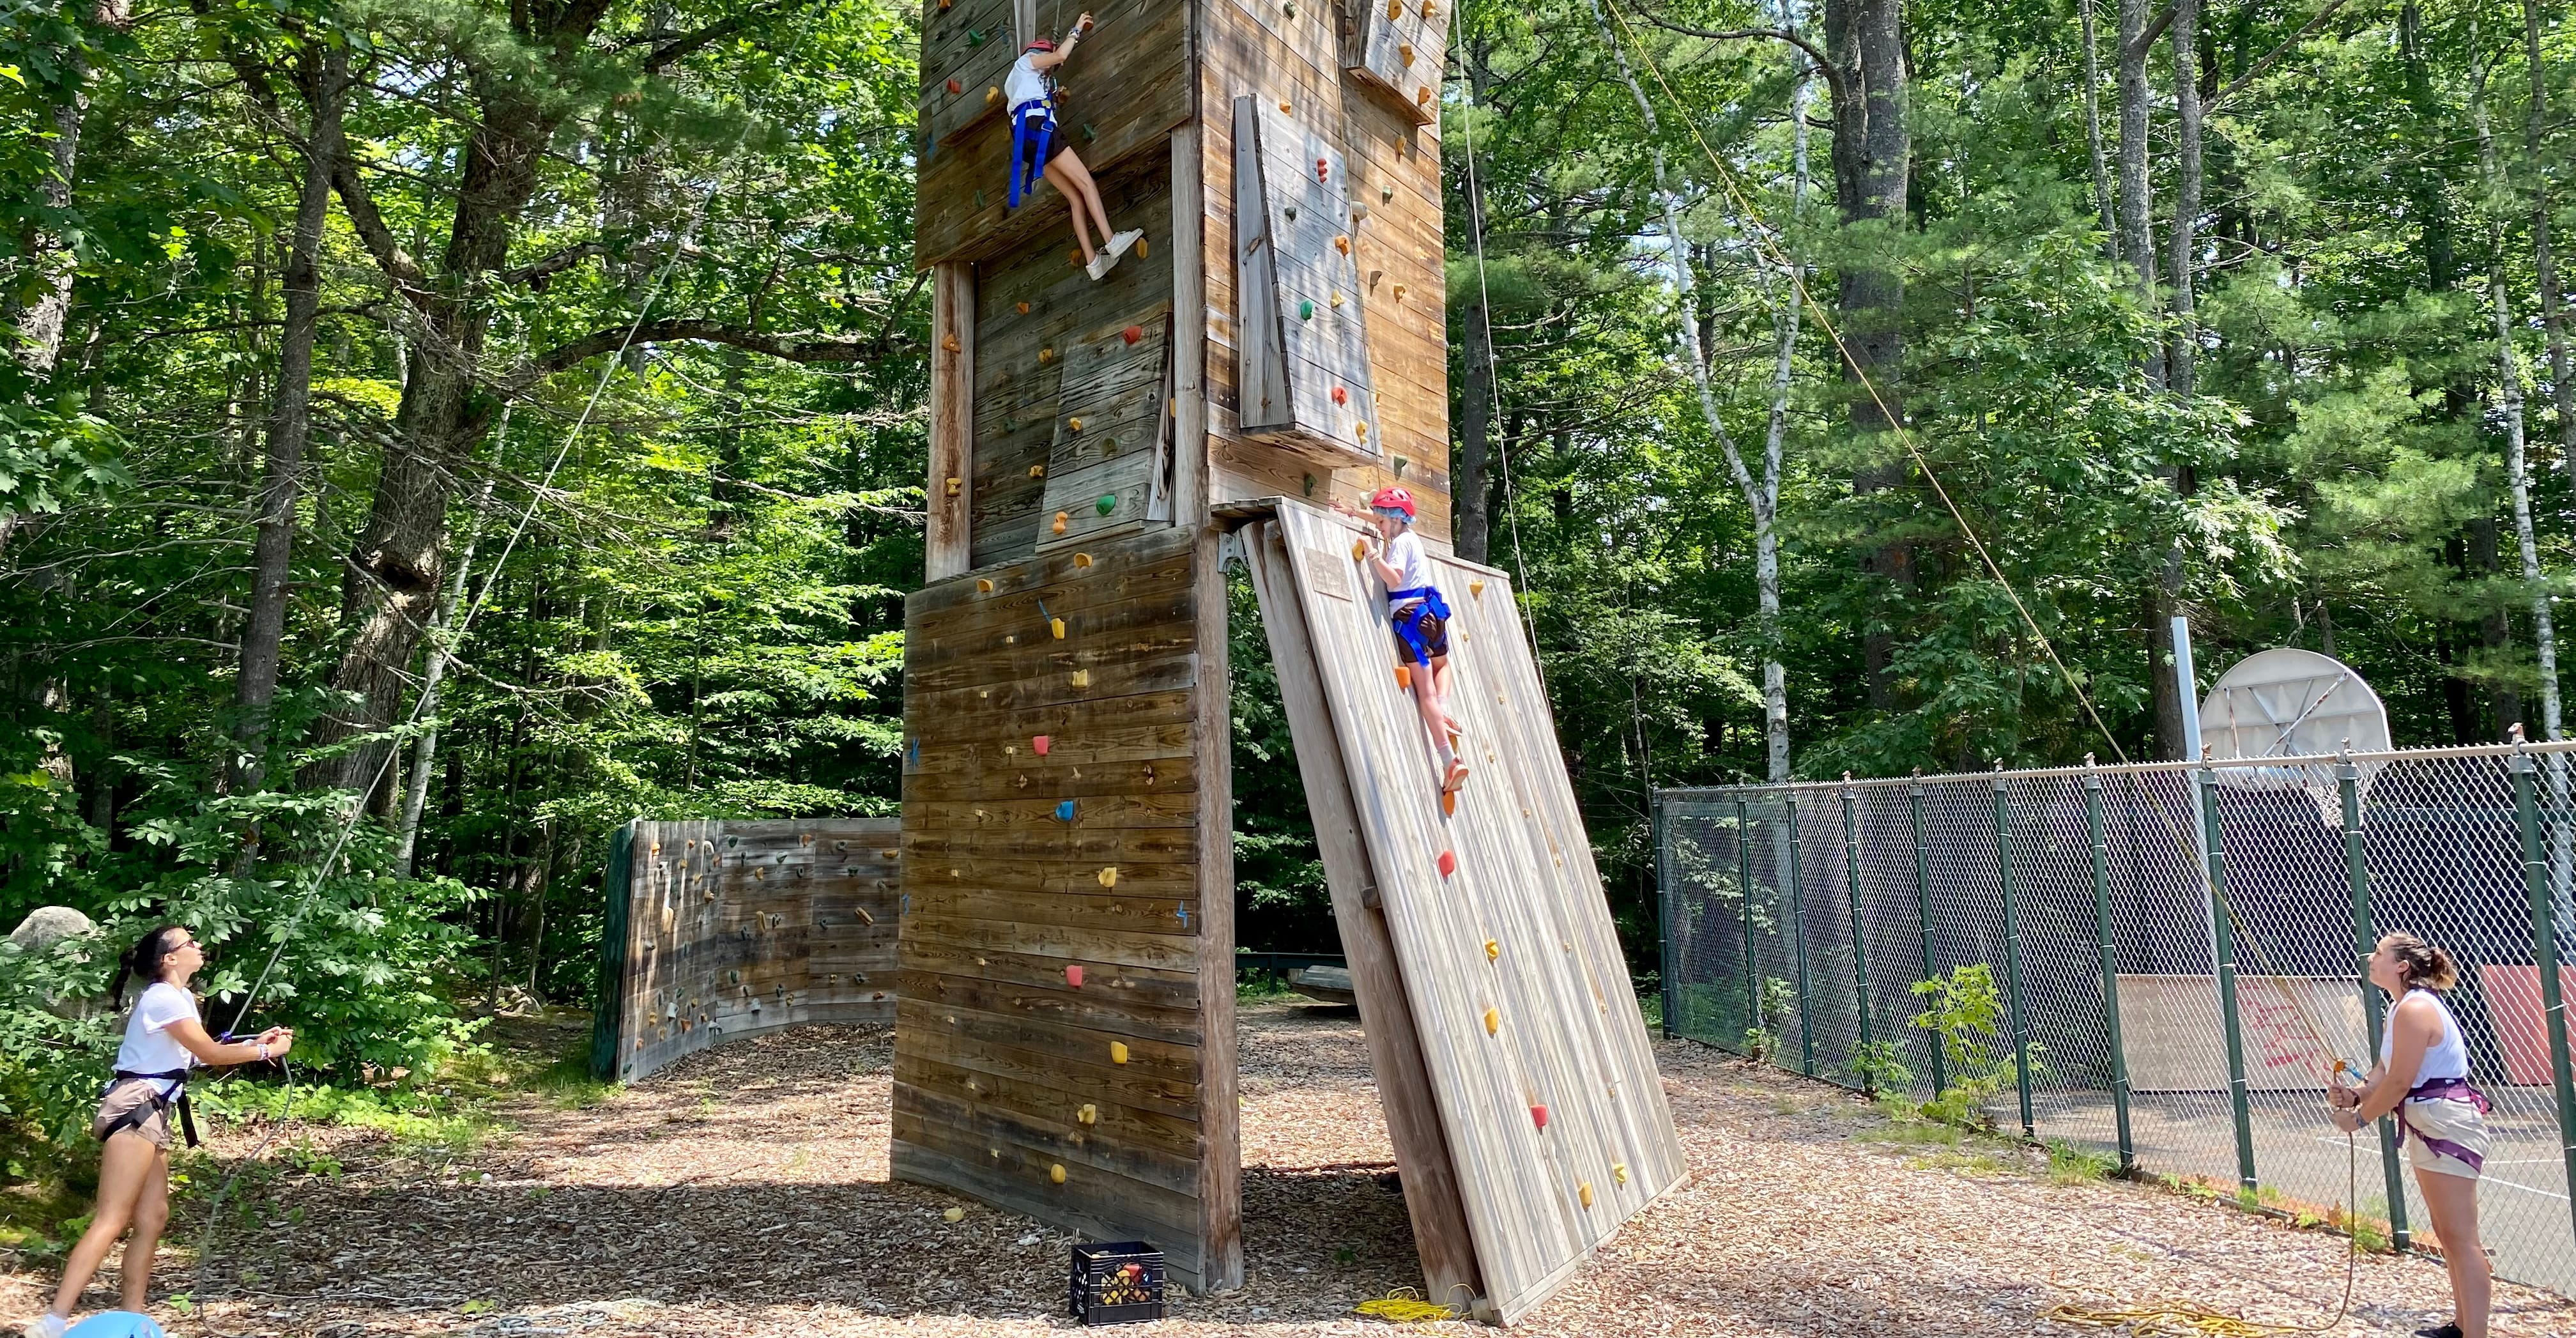 Camp Walden staff members assist campers on the climbing wall.